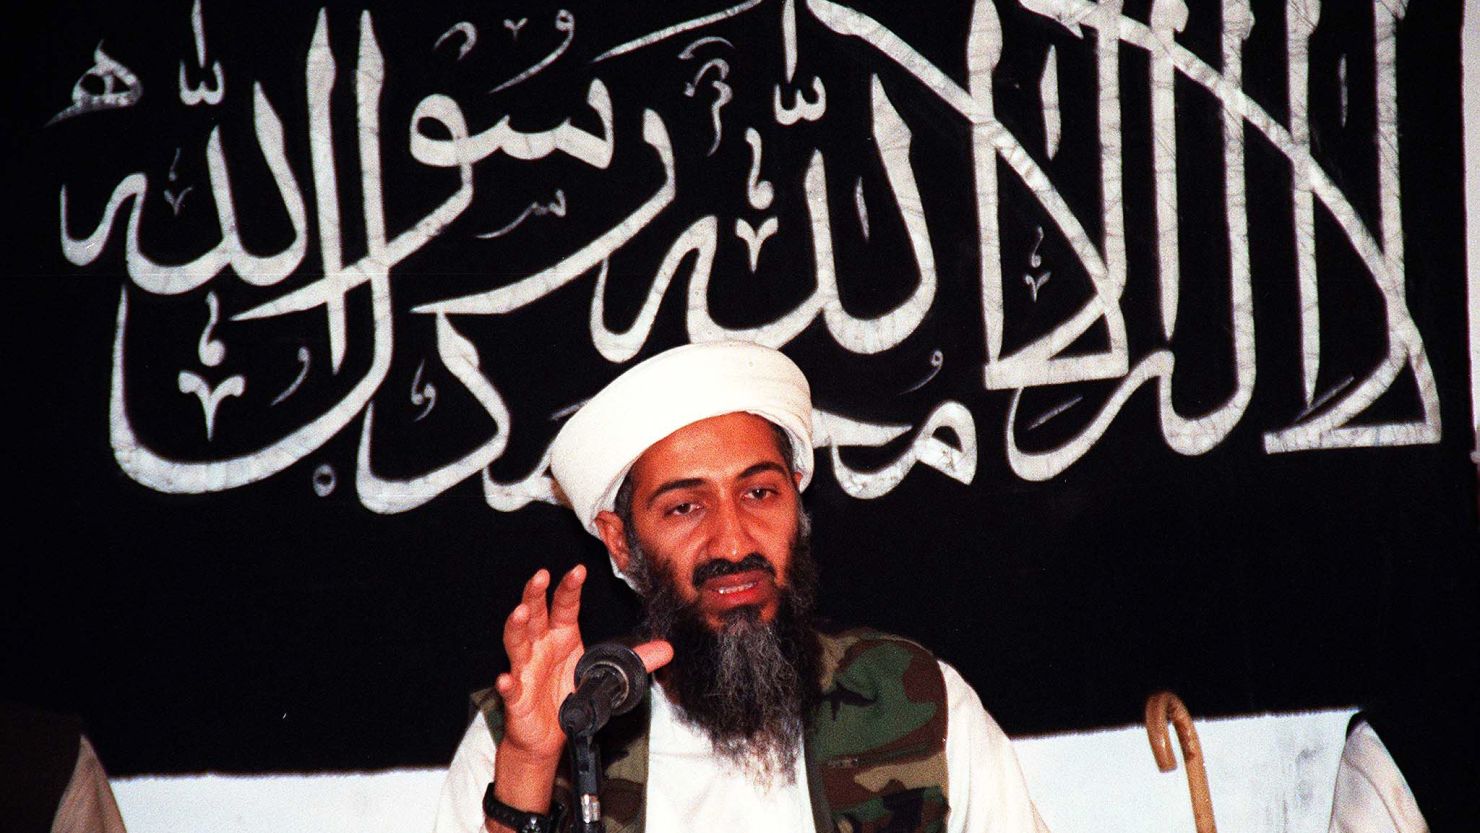 Releasing photos of Osama bin Laden's body would incite violence against the United States, officials say.